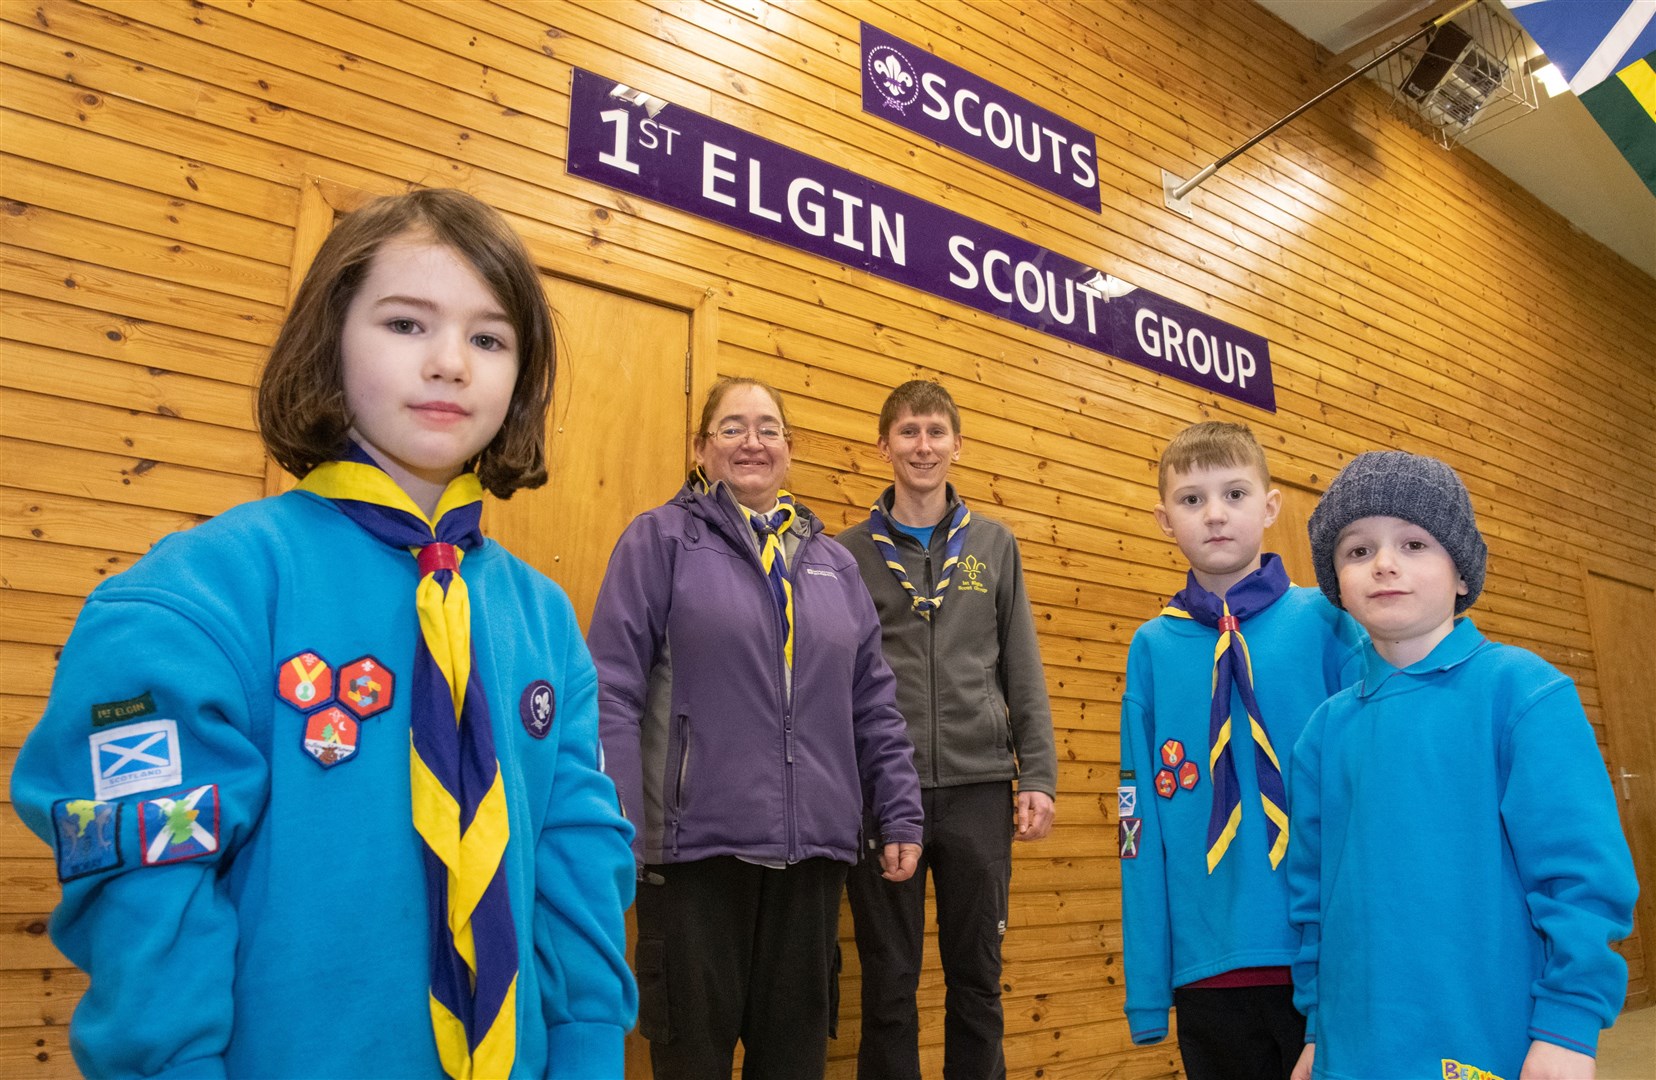 The 1st Elgin Scout Group are appealing for more volunteers after a huge upsurge in numbers of children looking to attend. From left: Emma Simpson, Debbie Rigby, Steven Thomson, Aiden McMillian and Archie Fairburn. Picture: Daniel Forsyth..